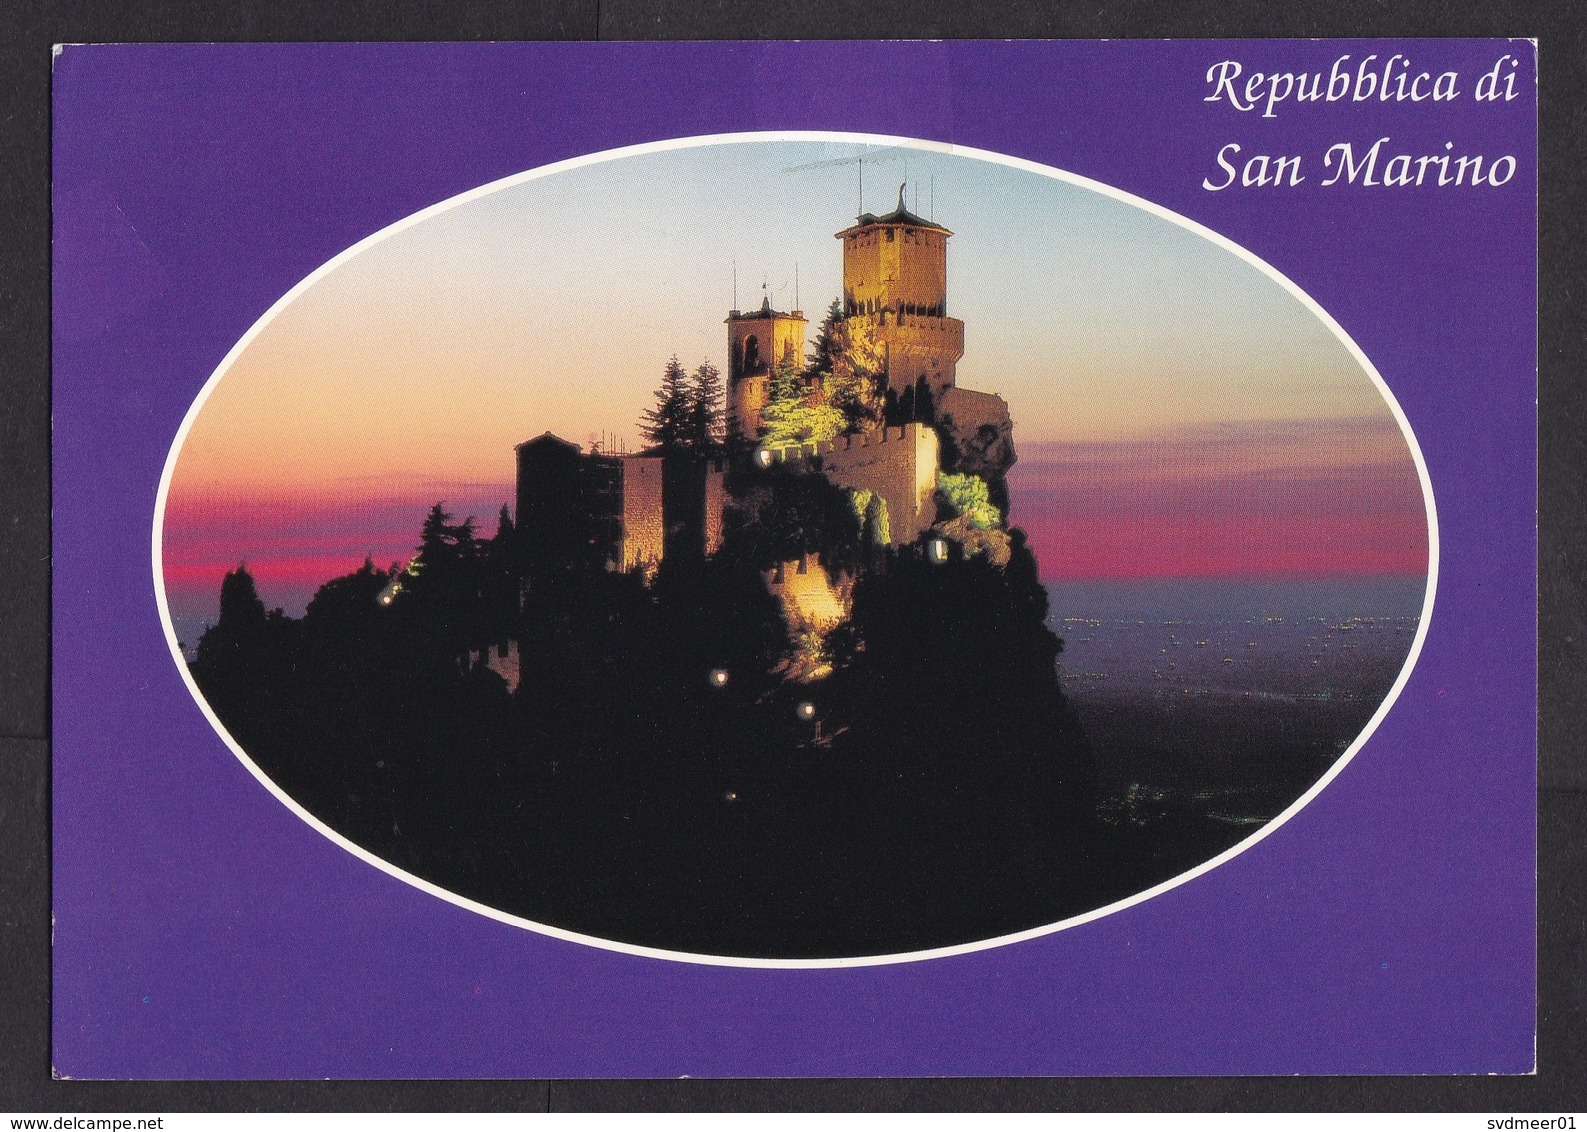 San Marino: PPC Picture Postcard To Germany, 1997, 2 Stamps, Dolphin, Fish, Europa, Legend, Myth (tape At Back) - Briefe U. Dokumente